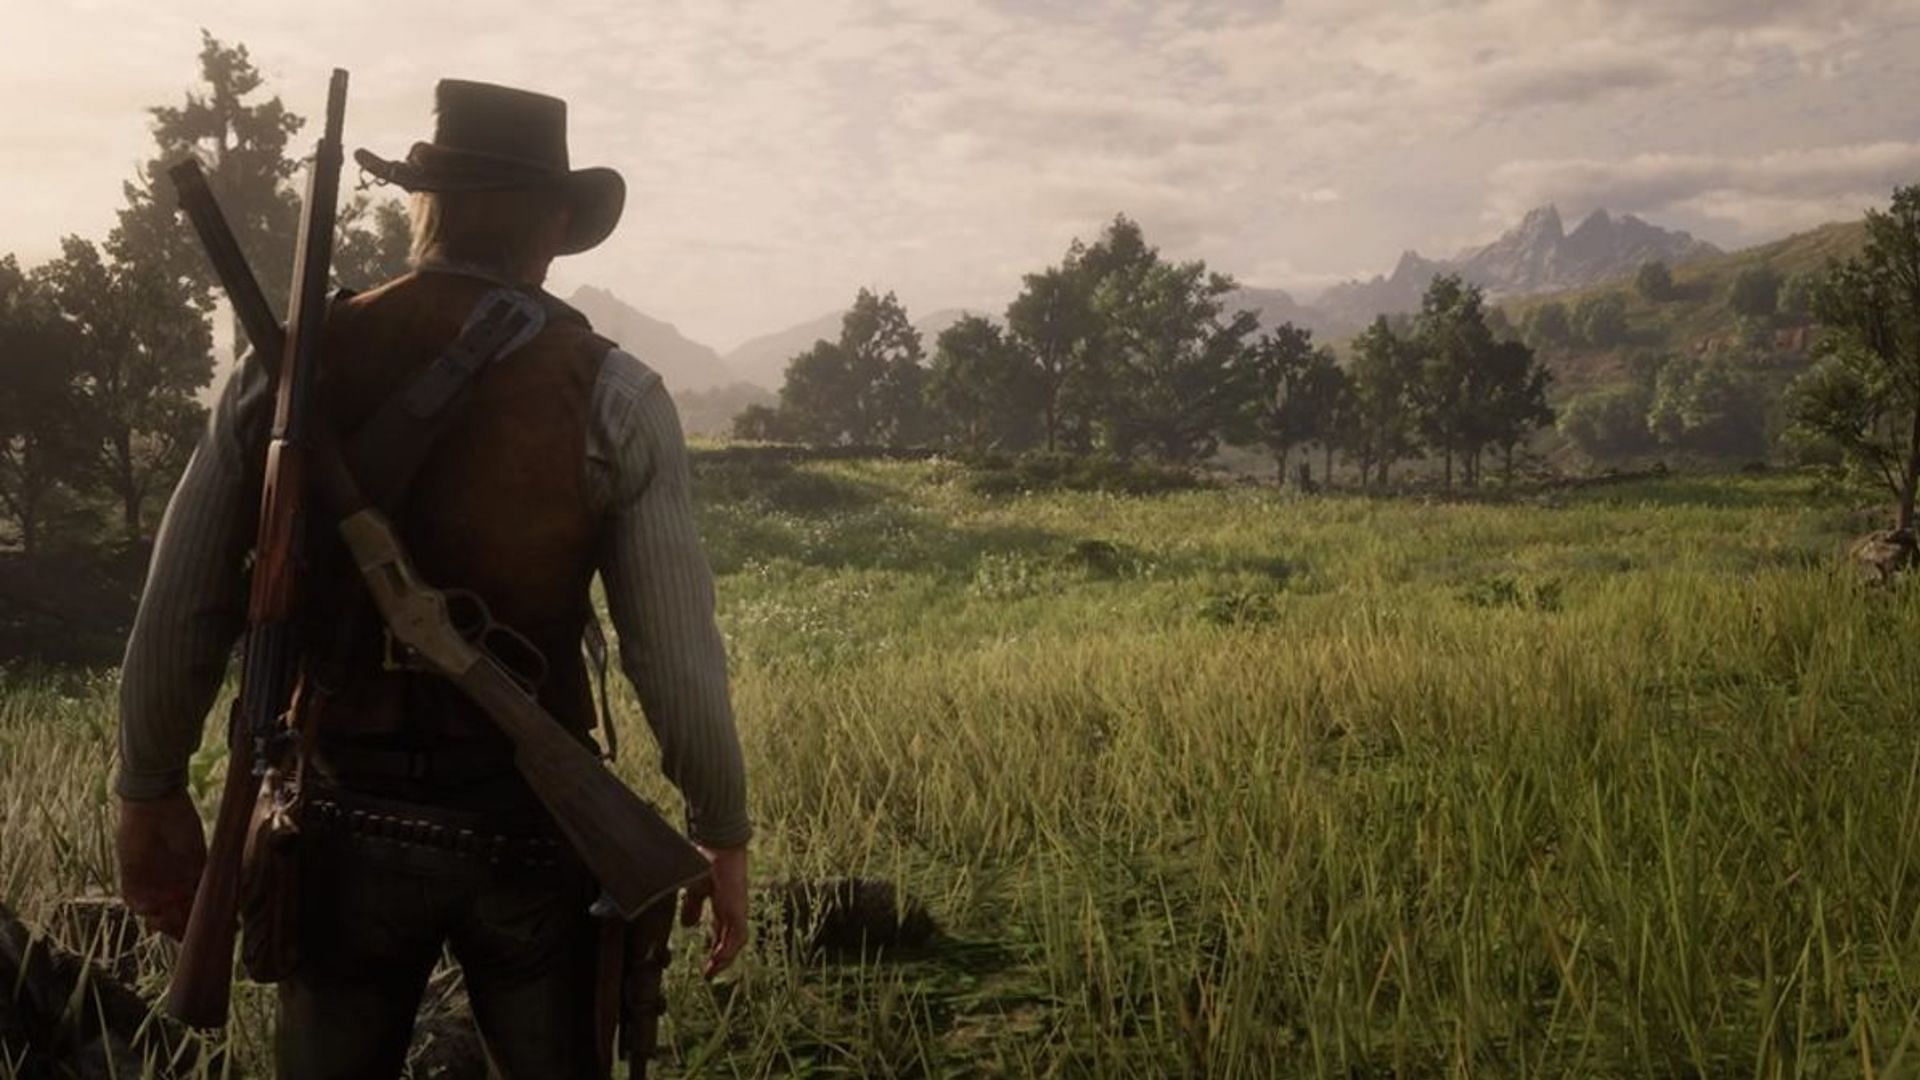 Red Dead Redemption 2 allows players to have guns on their backs (Image via Rockstar Games)